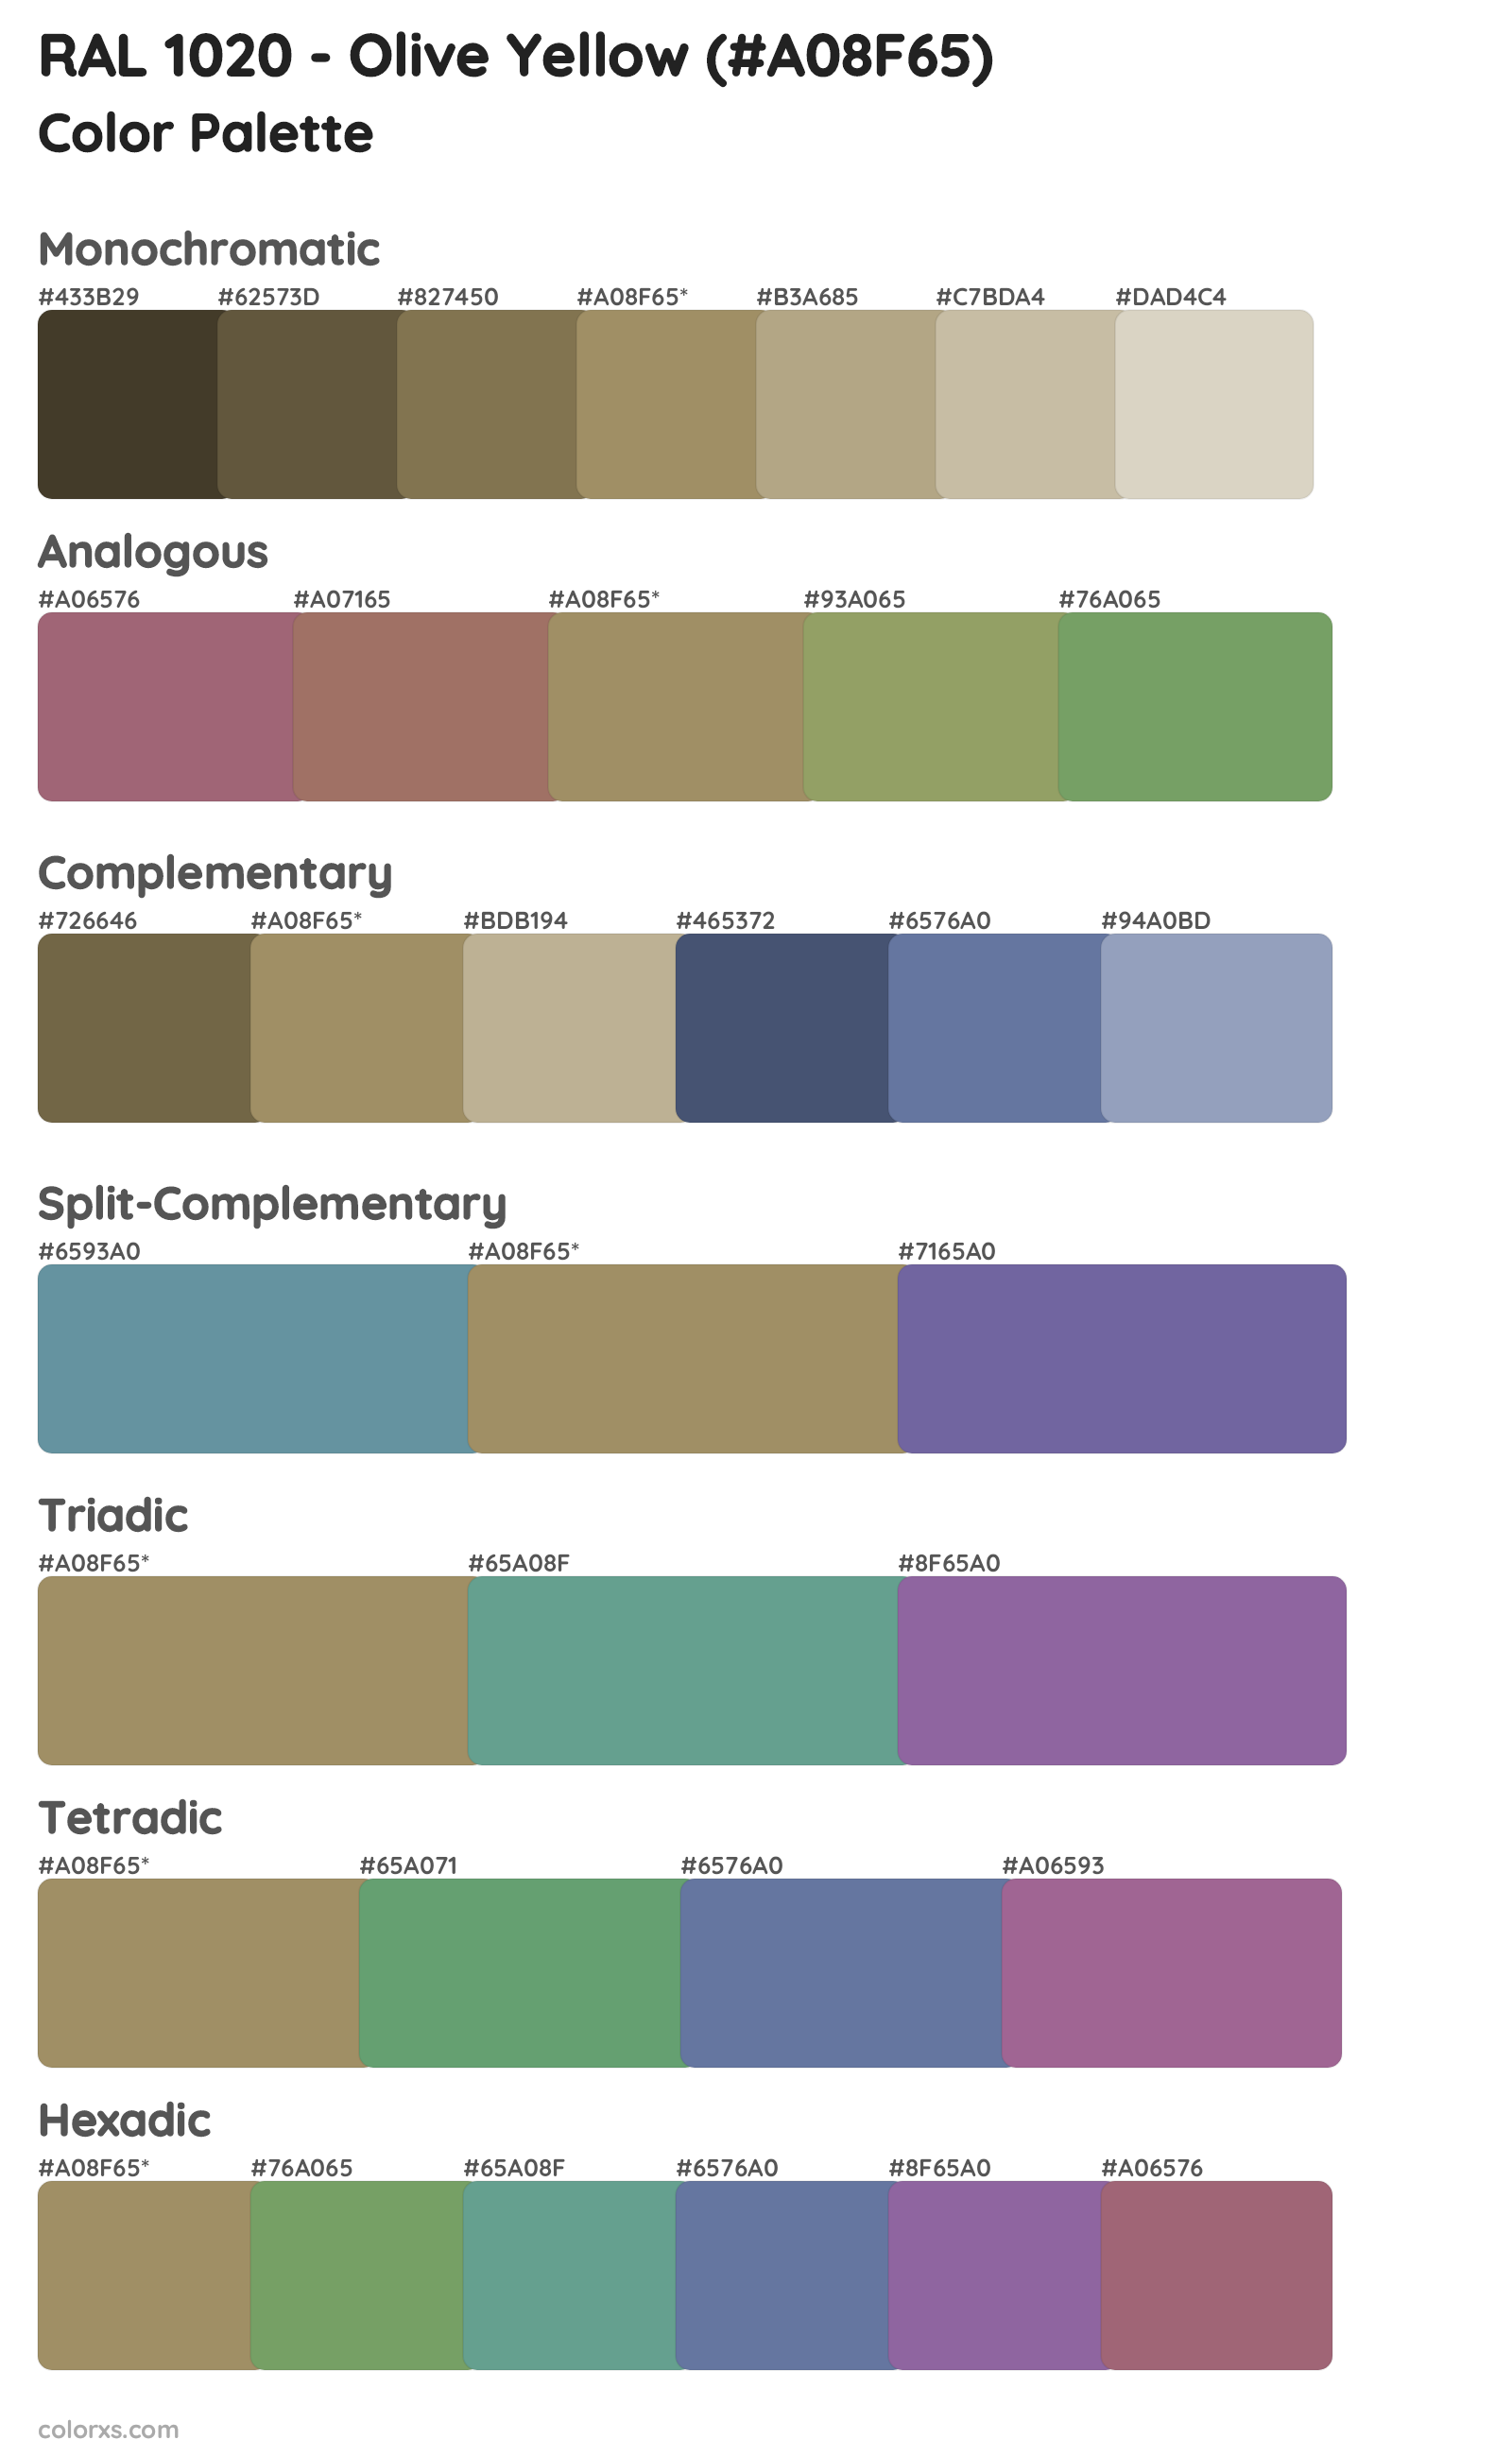 RAL 1020 - Olive Yellow Color Scheme Palettes